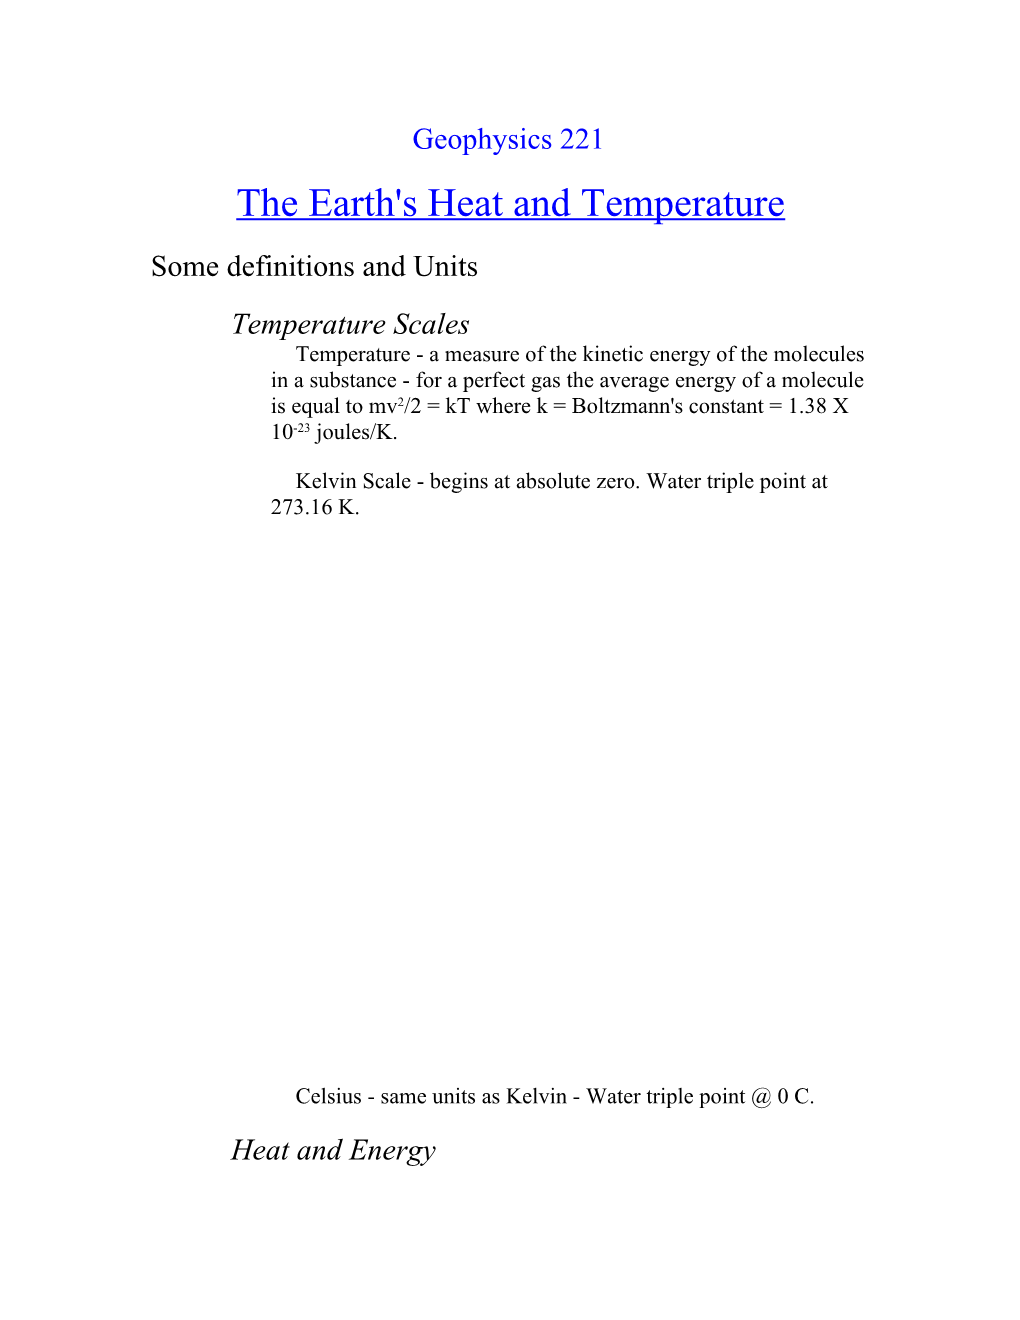 The Earth's Heat and Temperature